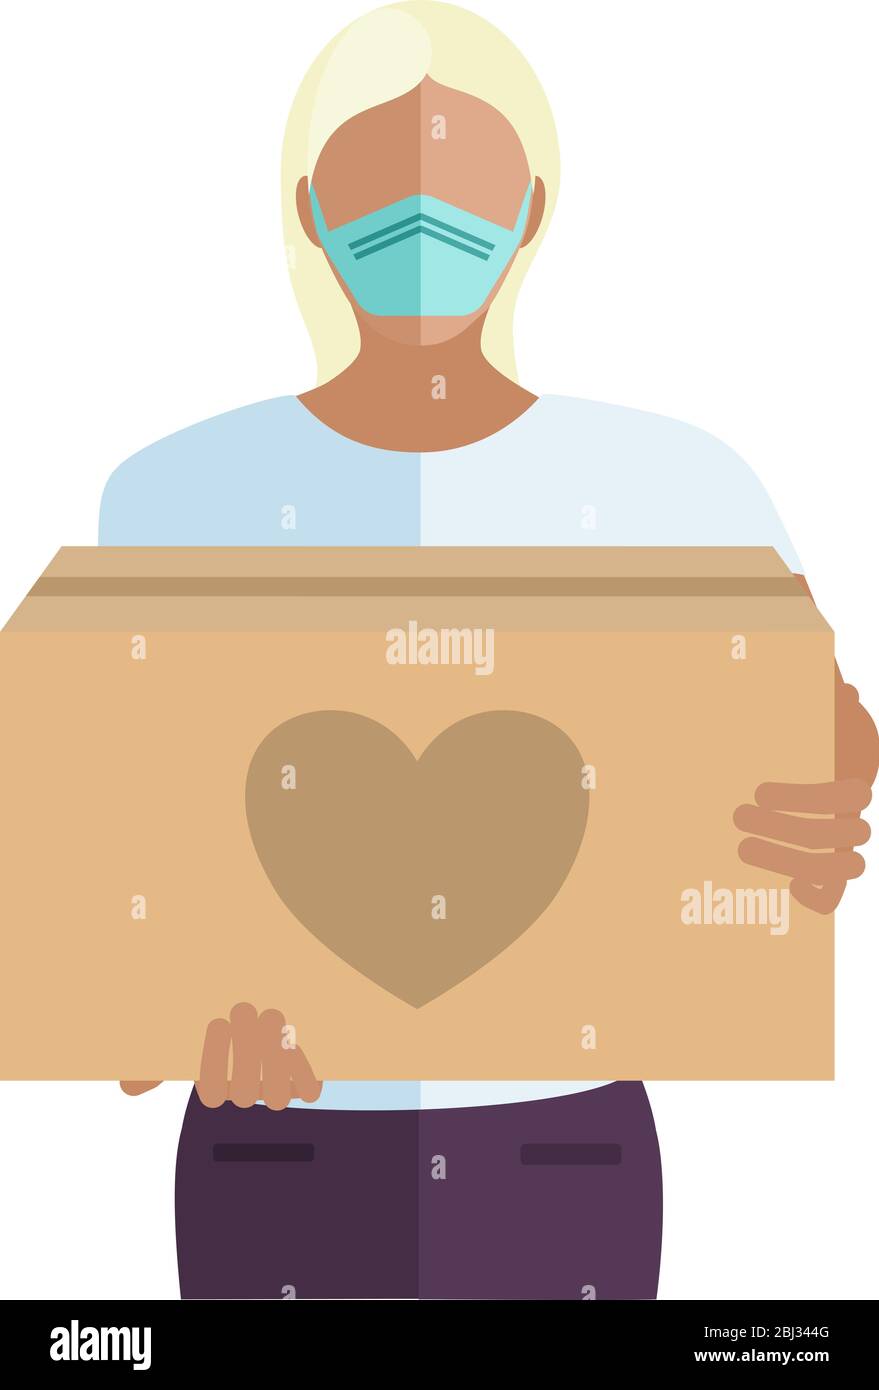 People volunteering to help others in need with boxes of donations during the COVID-19 coronavirus pandemic Stock Vector